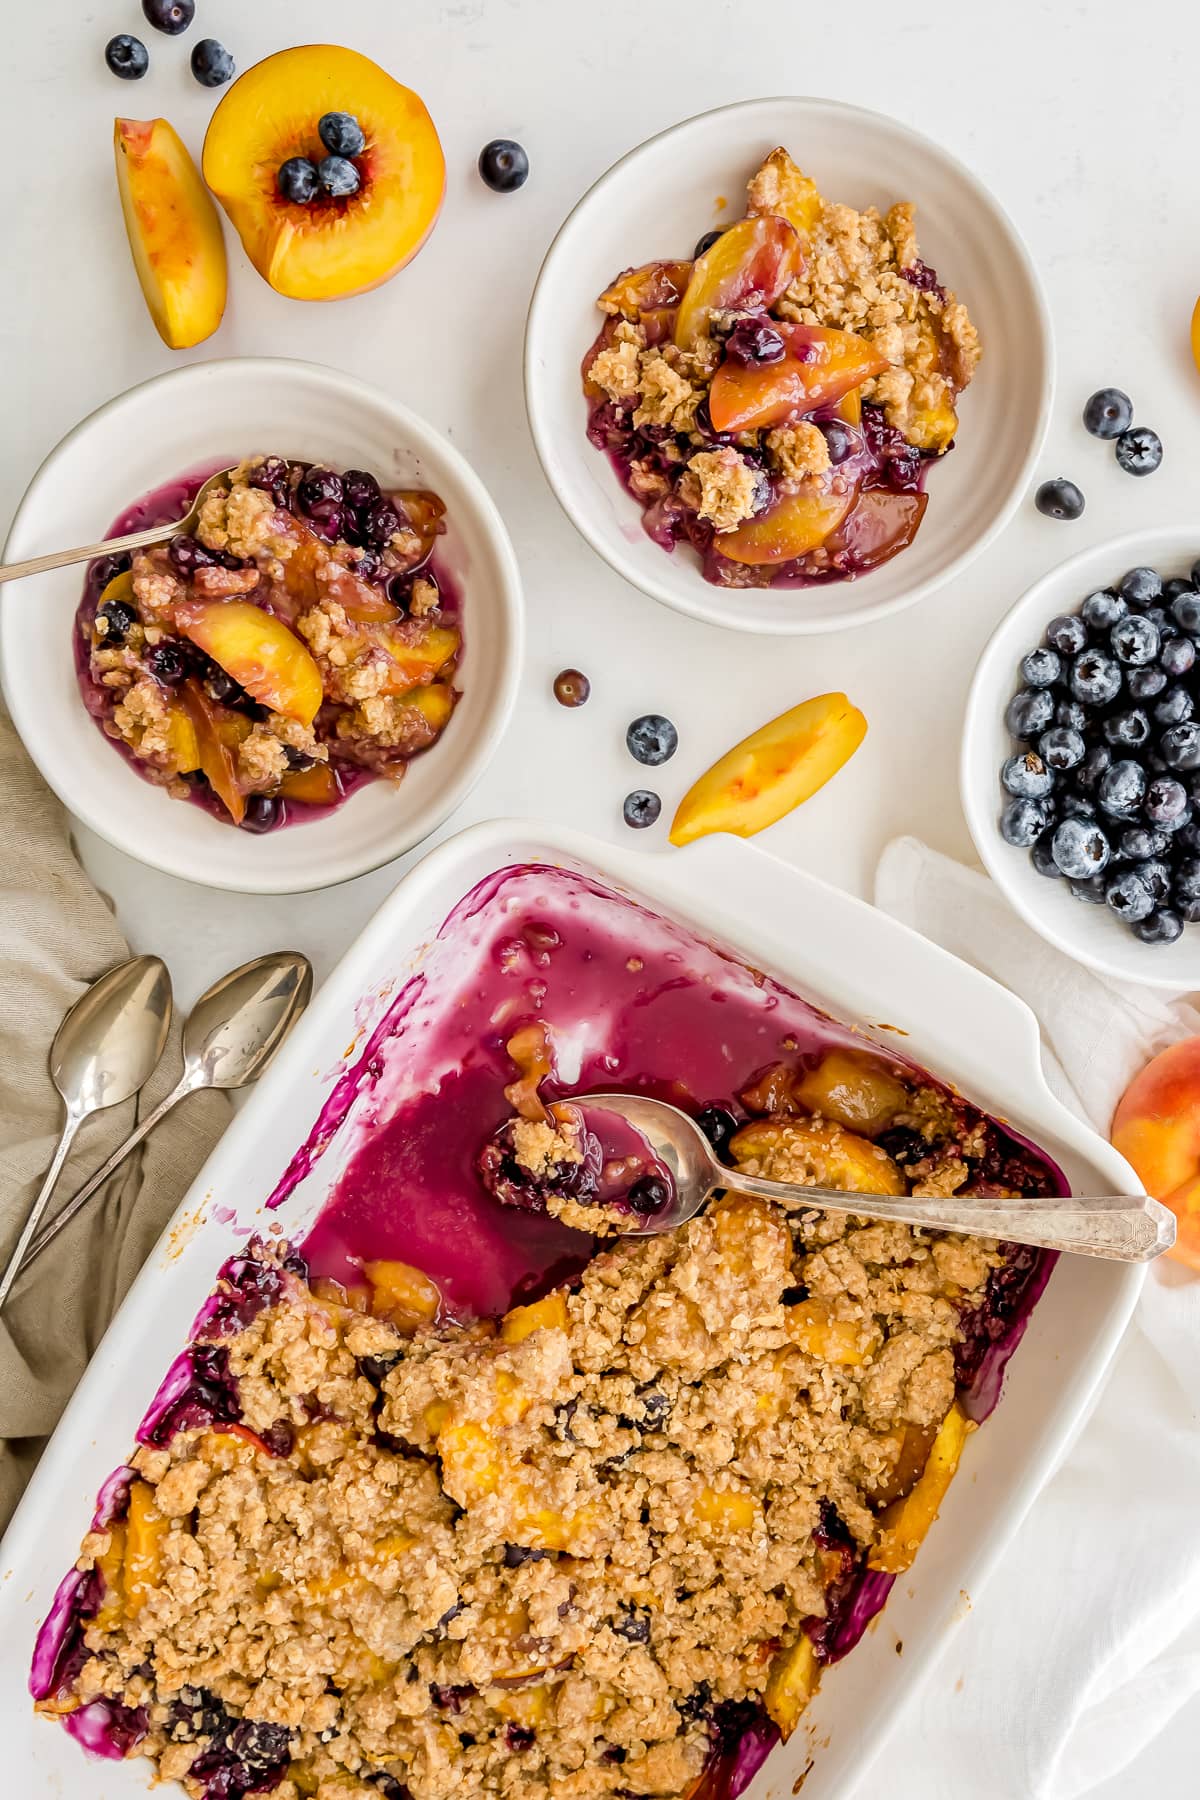 peach blueberry crisp in a baking dish and two servings in bowls next to the baking dish